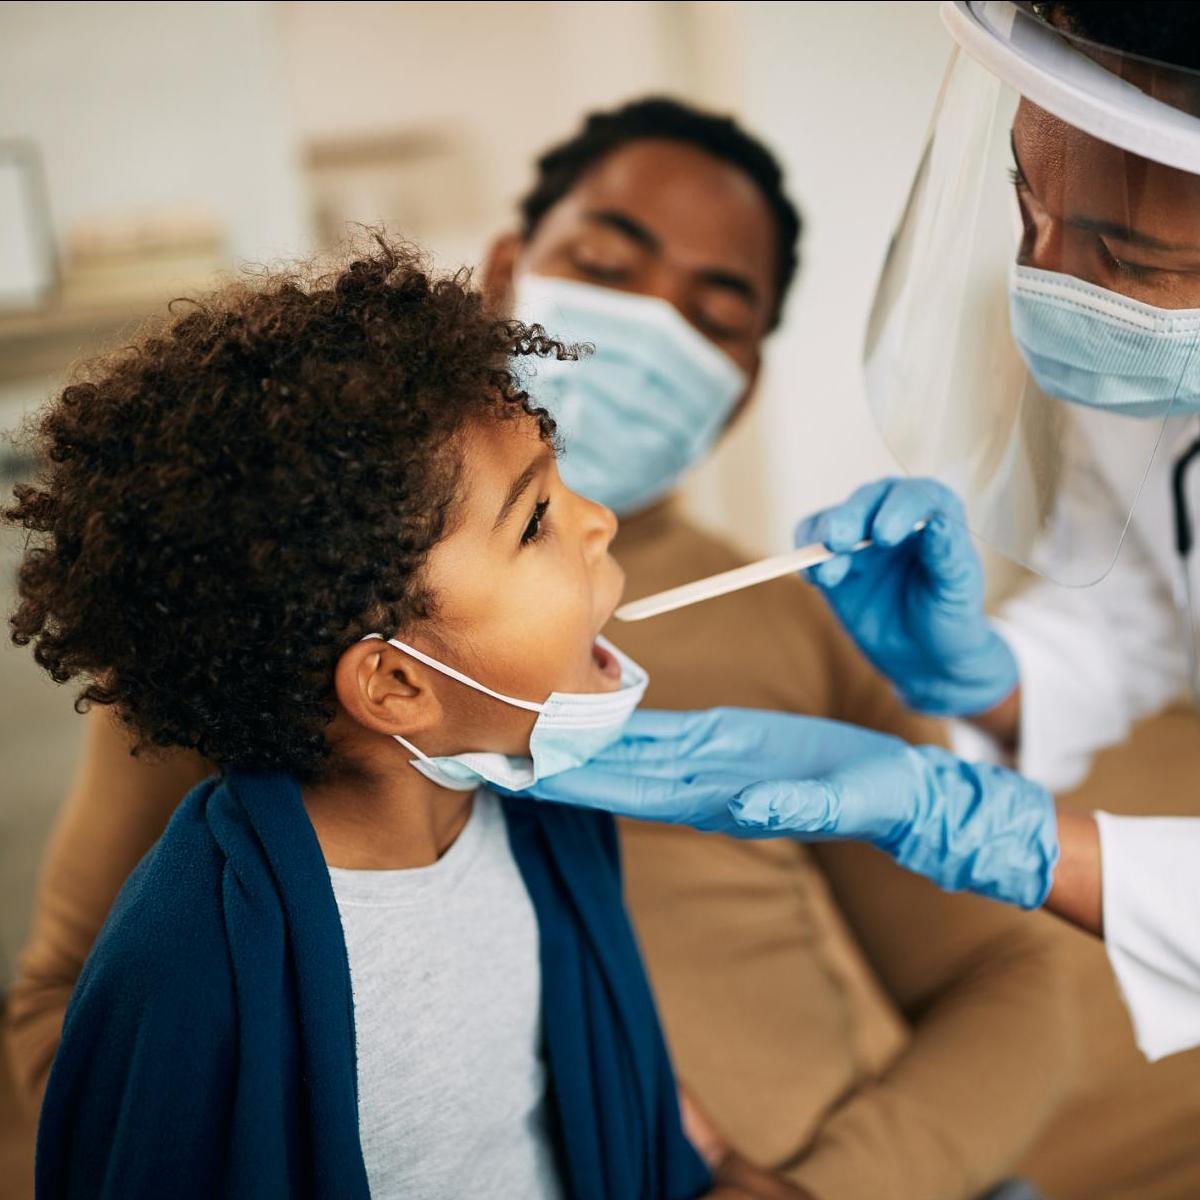 A young Black boy is examined by a Black doctor